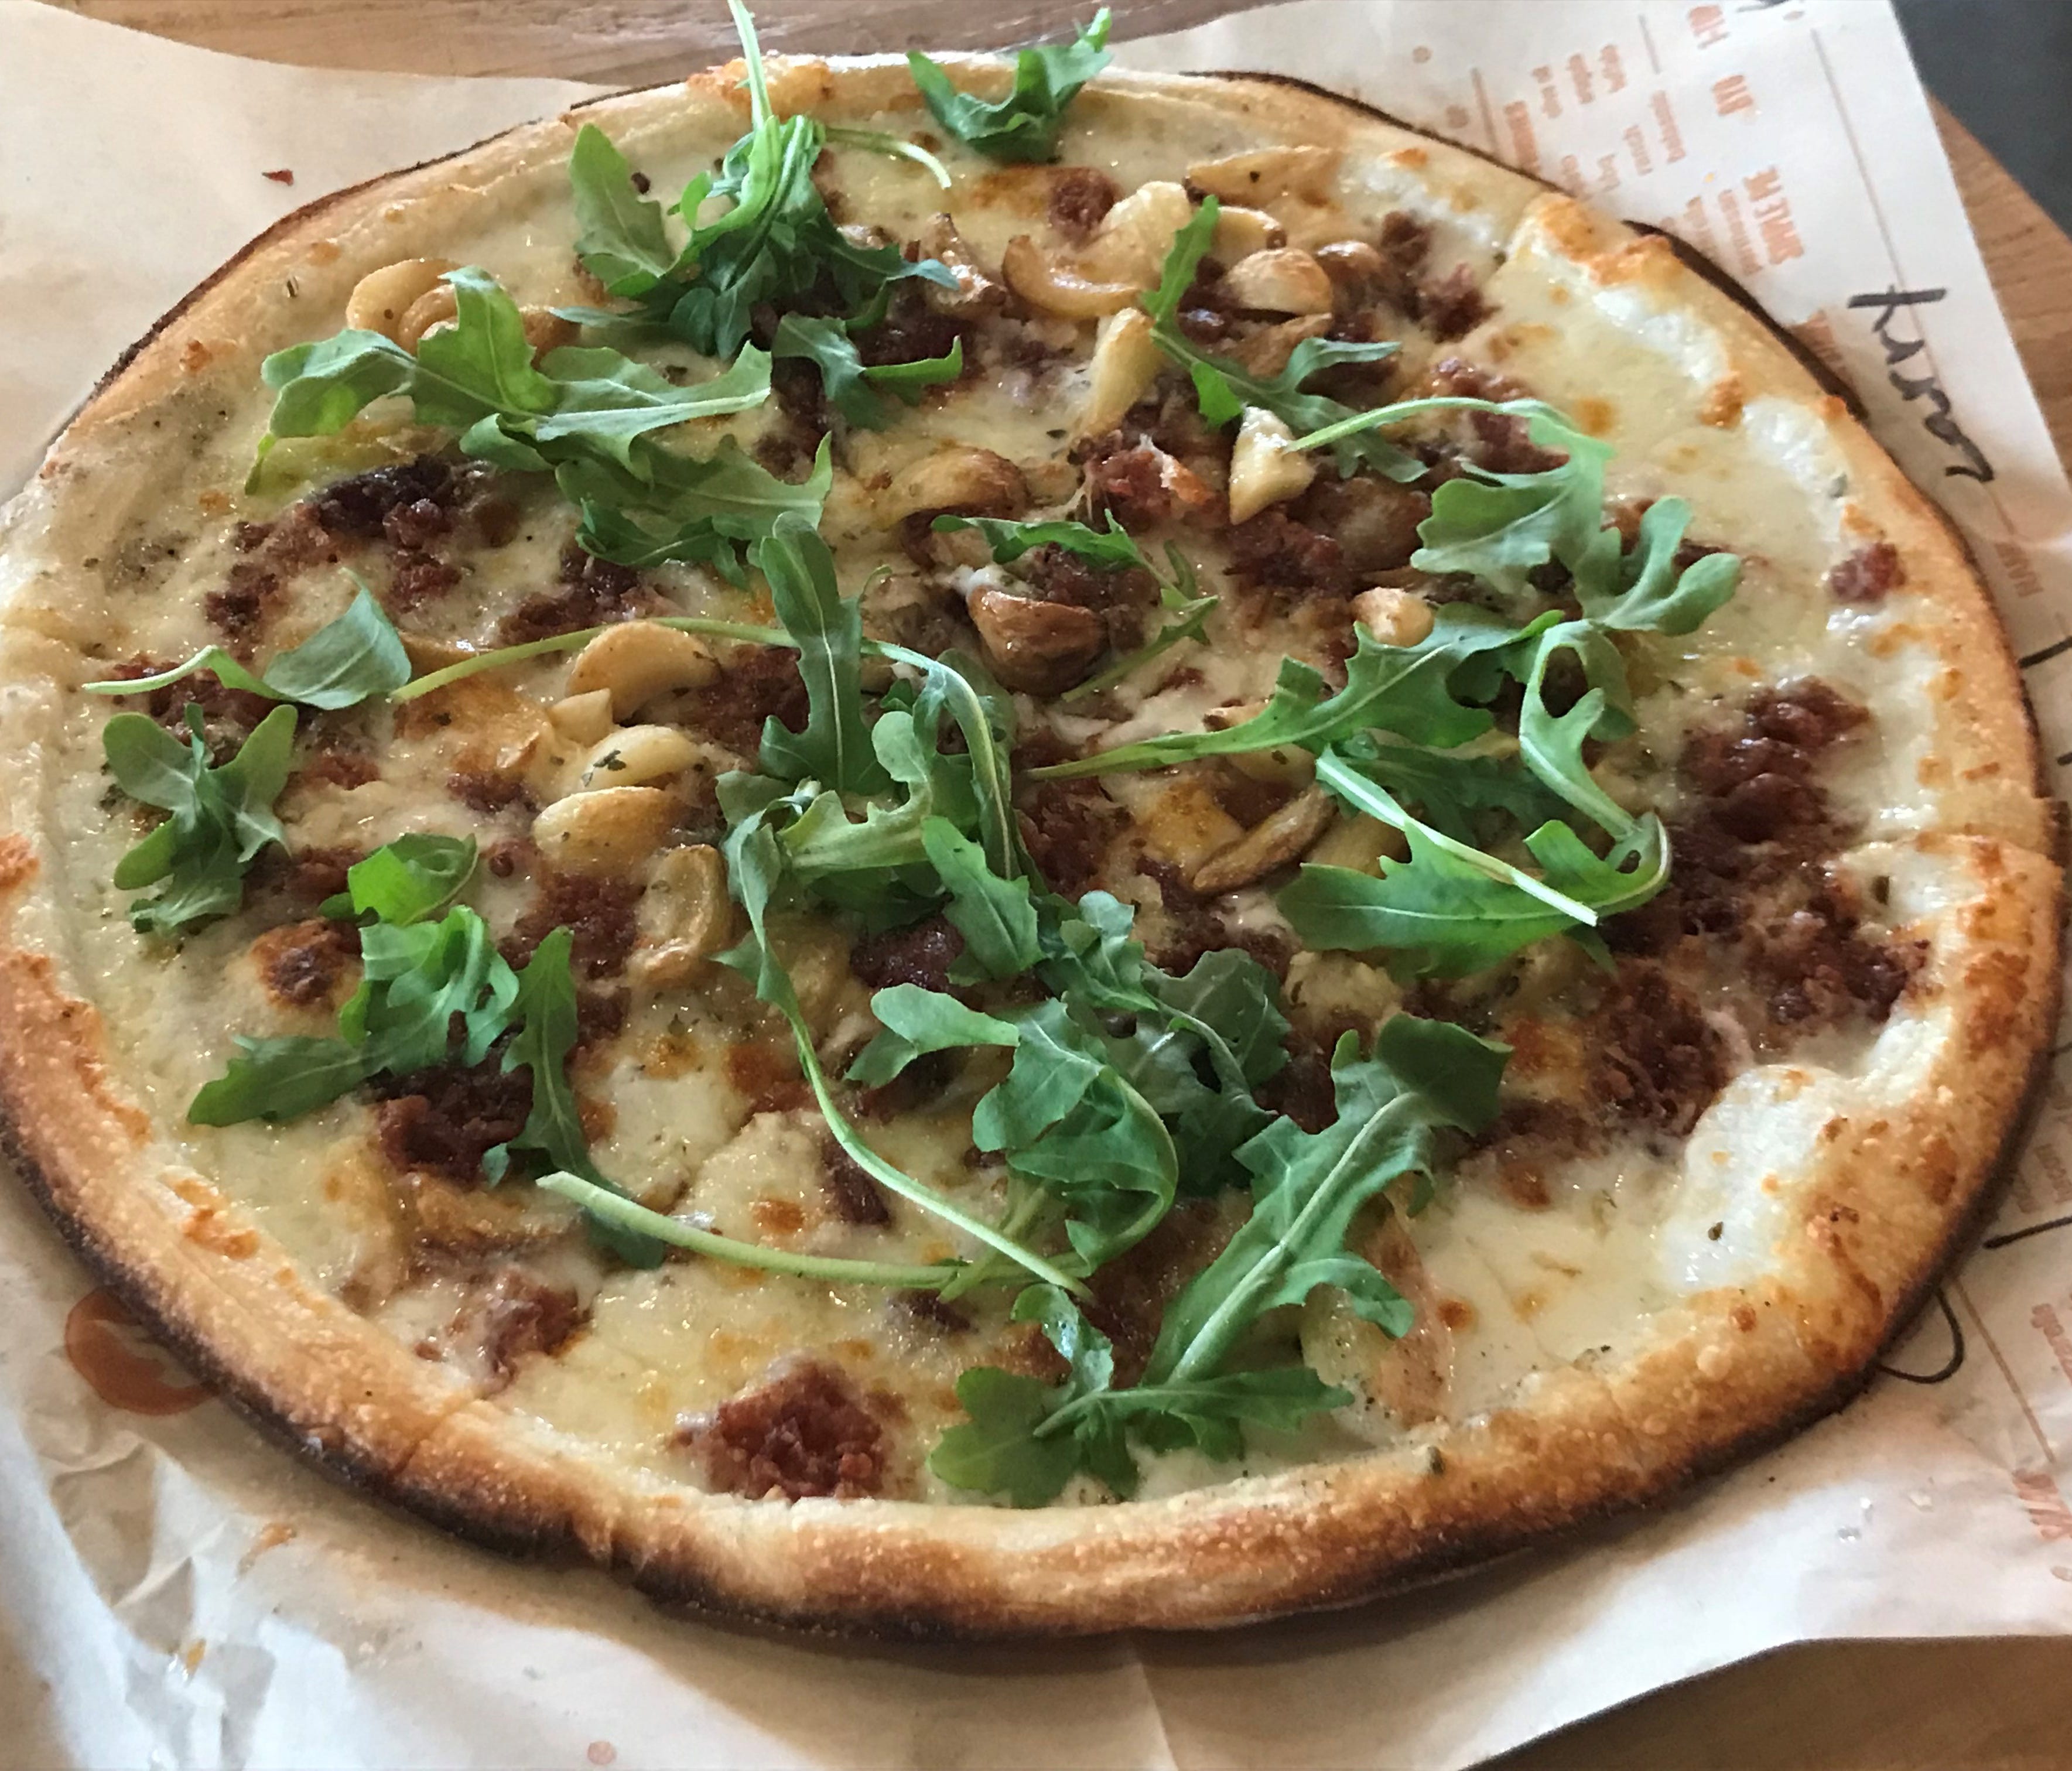 The signature White Top pizza has the option of adding roasted garlic cloves. It features a white cream sauce, mozzarella, Applewood bacon, oregano and baby arugula. All the signature and build your own (BYO) pies at Blaze are customizable with unlim